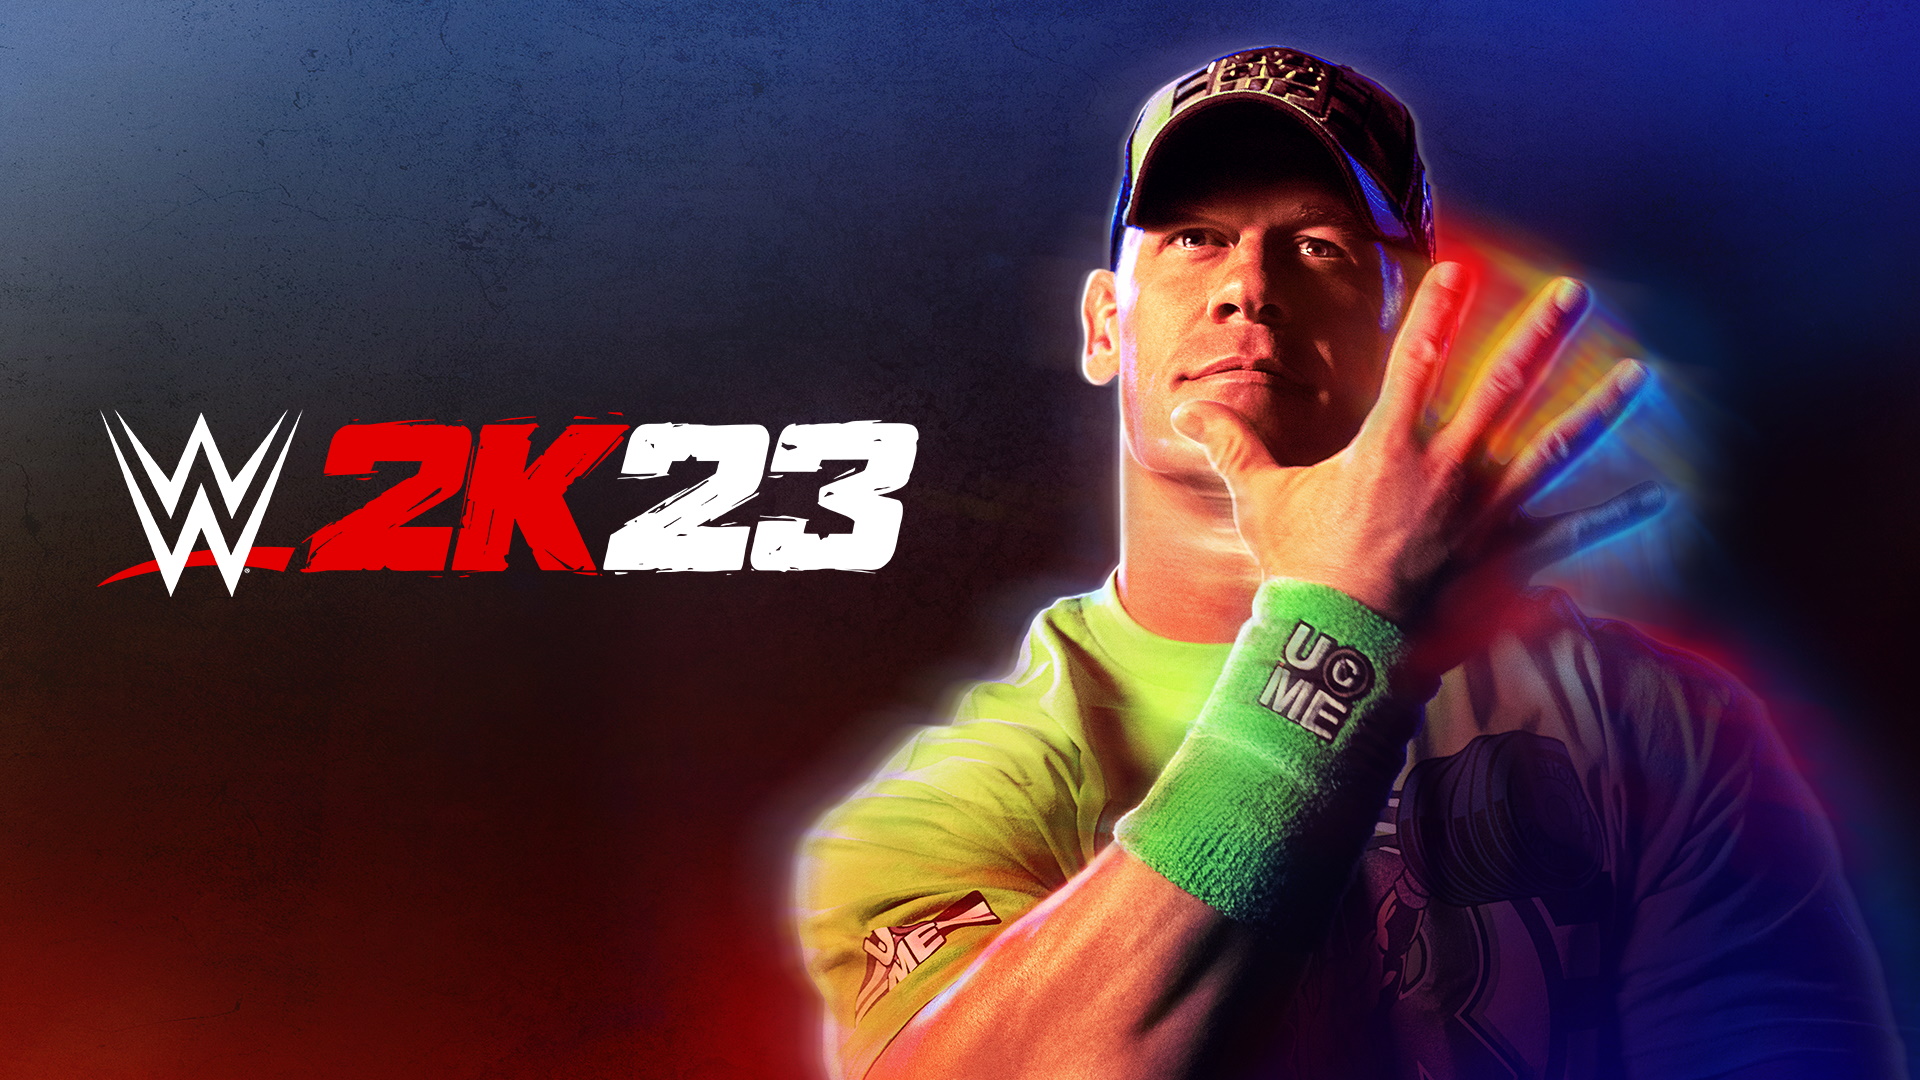 WWE 2K23 To Feature 24 Playable Superstars & Legends In Post-Launch Content